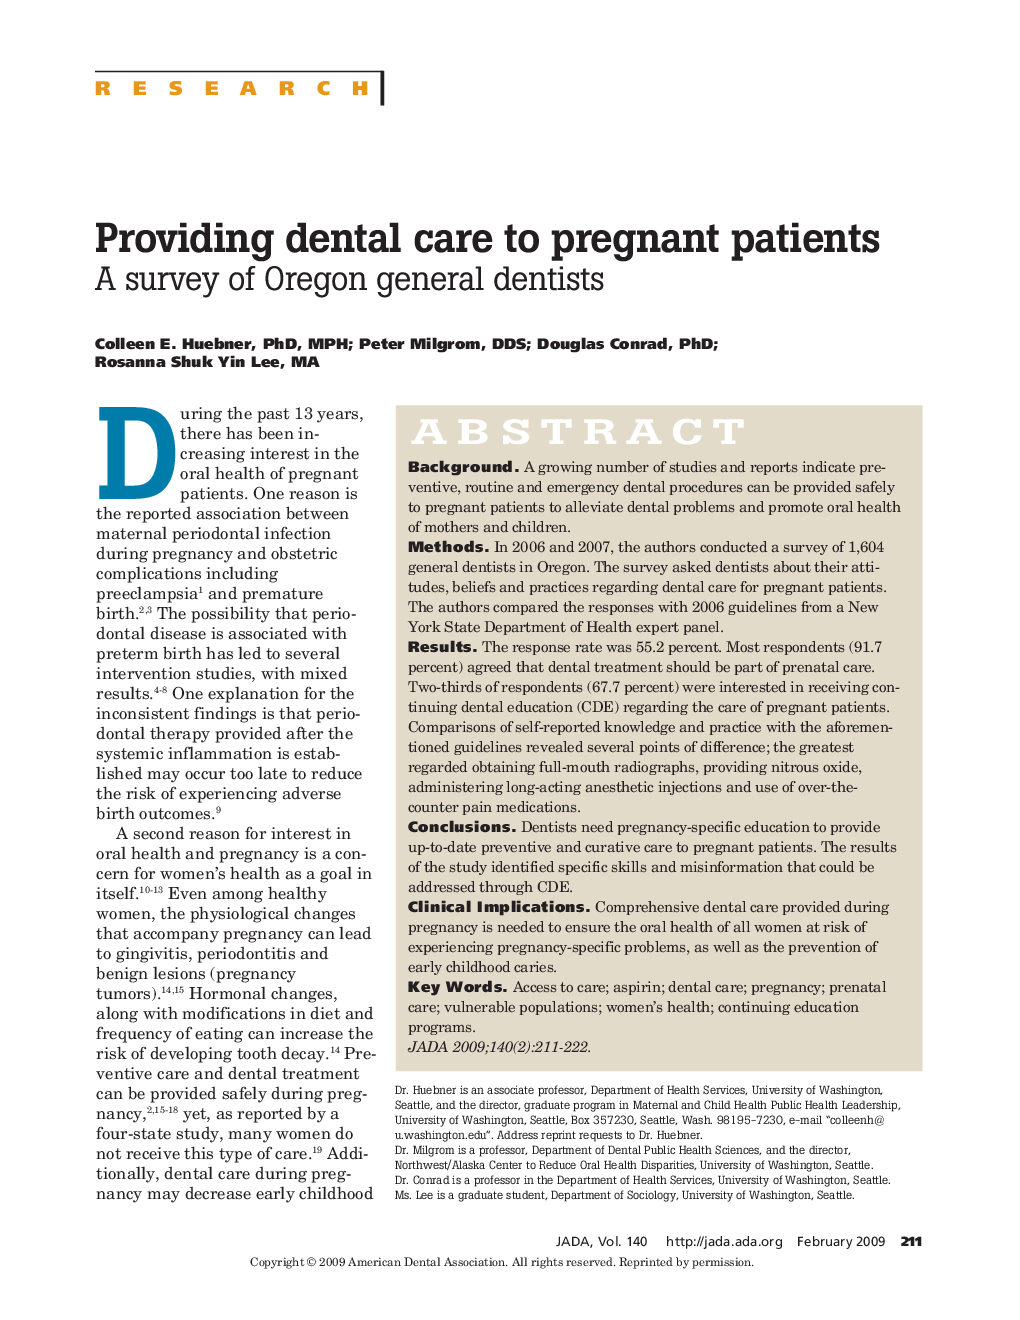 Providing dental care to pregnant patients : A survey of Oregon general dentists